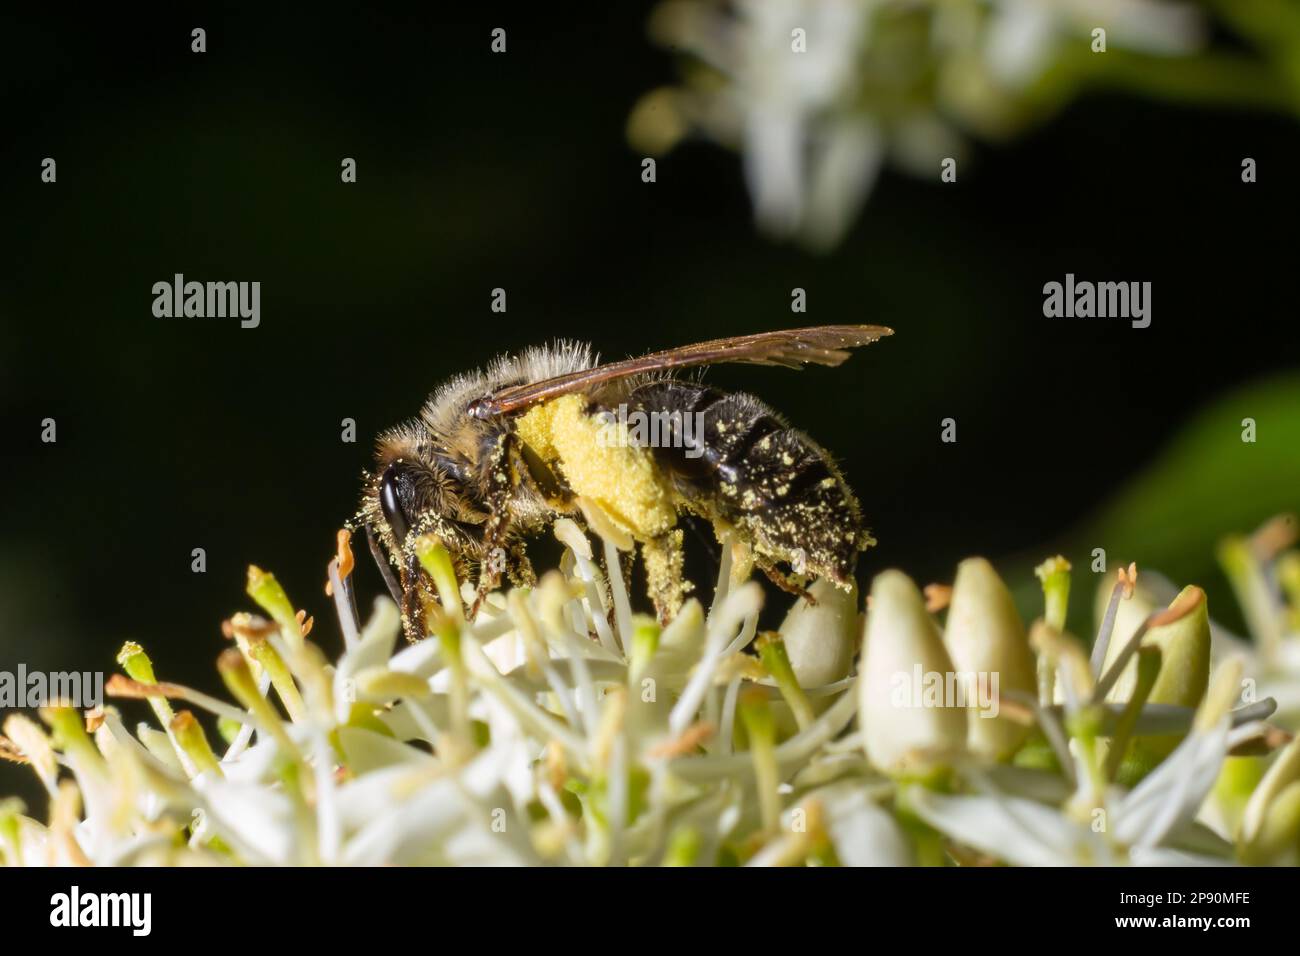 Honey bee with a basket for pollen sits on white flowers Cornus alba, red-barked, white or Siberian dogwood. Stock Photo